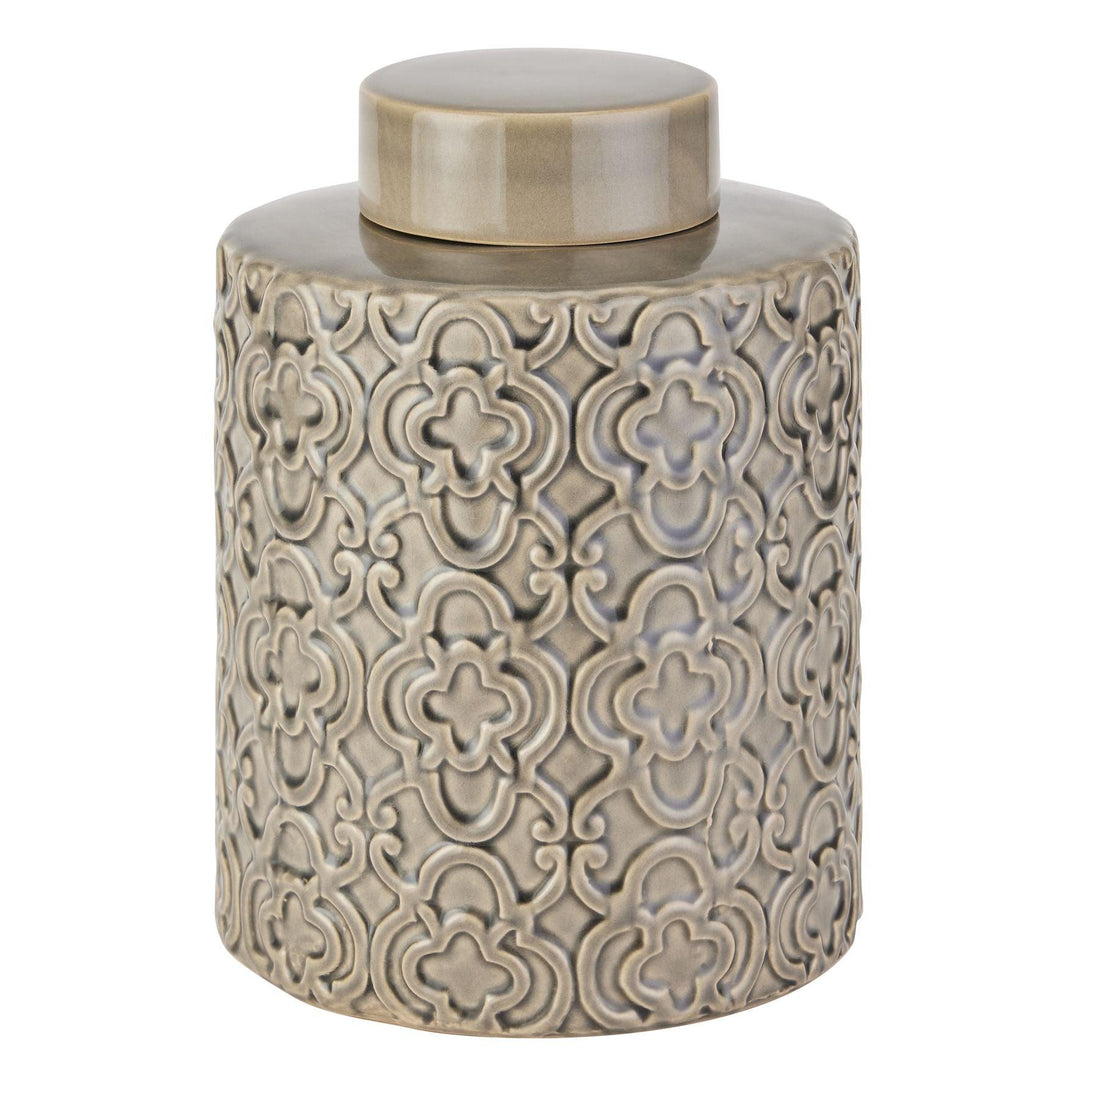 Seville Collection Large Grey Marrakesh Urn - £69.95 - Gifts & Accessories > Ornaments 